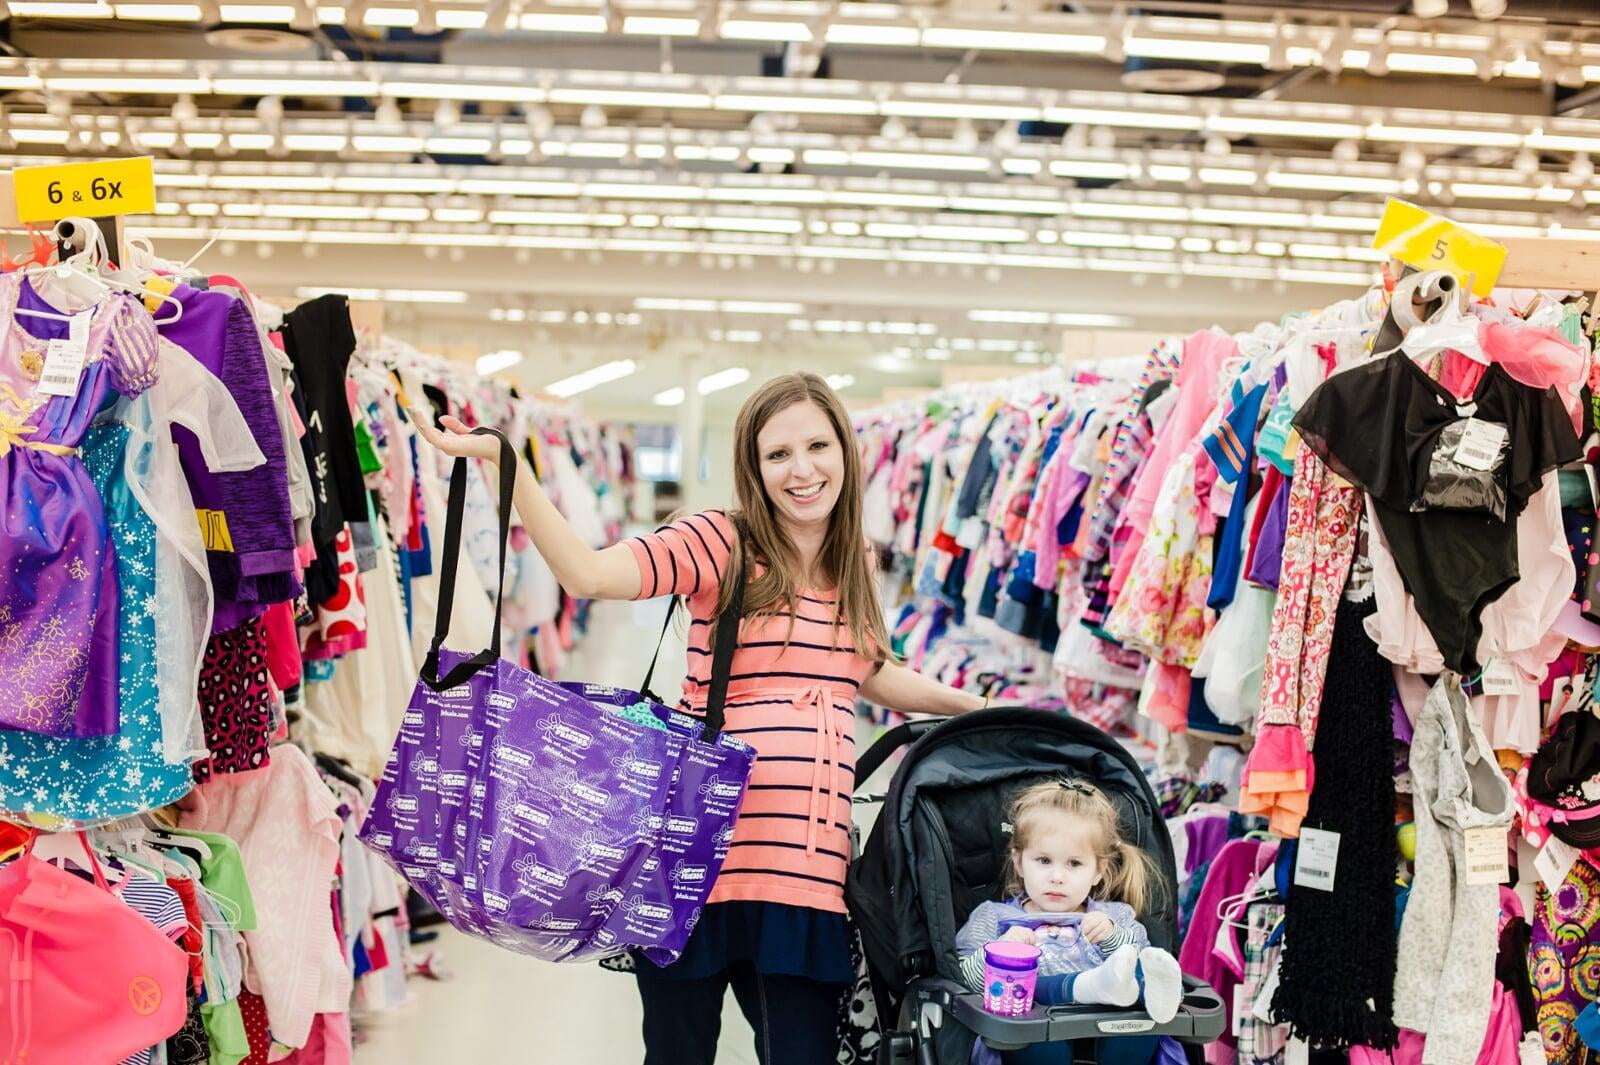 A mom with a large JBF shopping bag on her shoulder stands beside her husband who wears their toddler at a JBF sale.